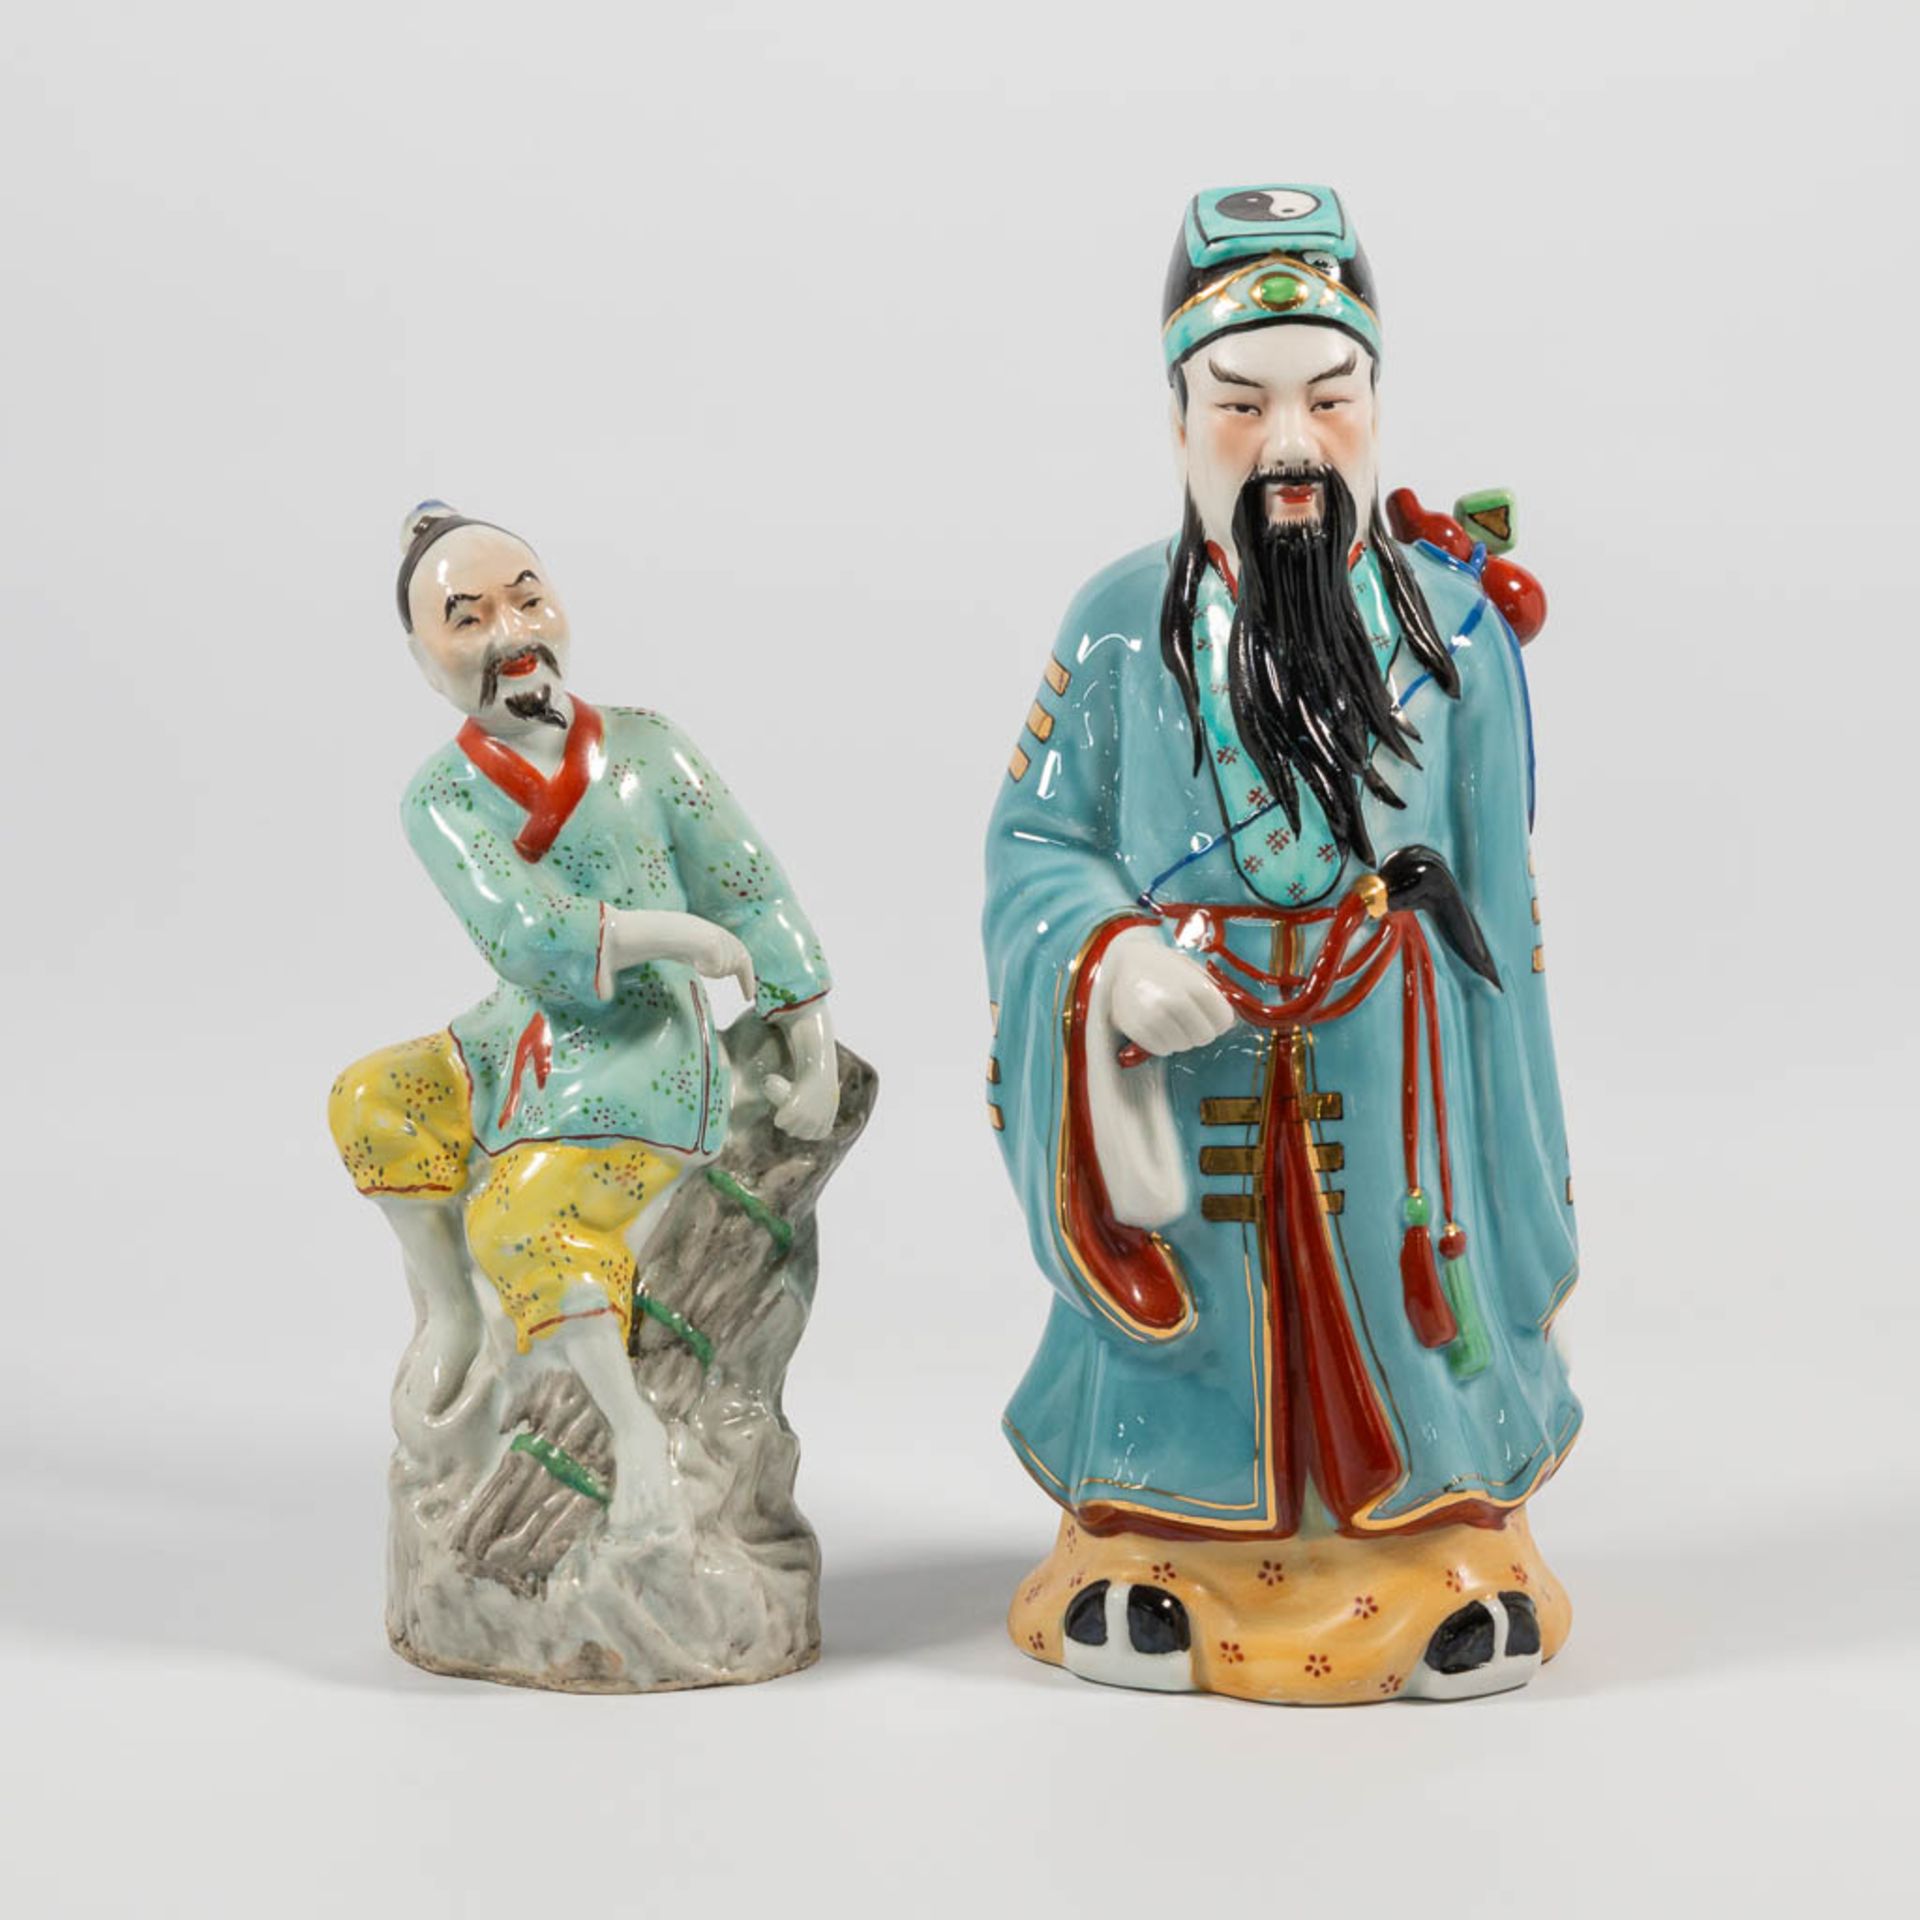 A Collection of 4 Chinese immortal figurines, made of porcelain. - Image 21 of 25